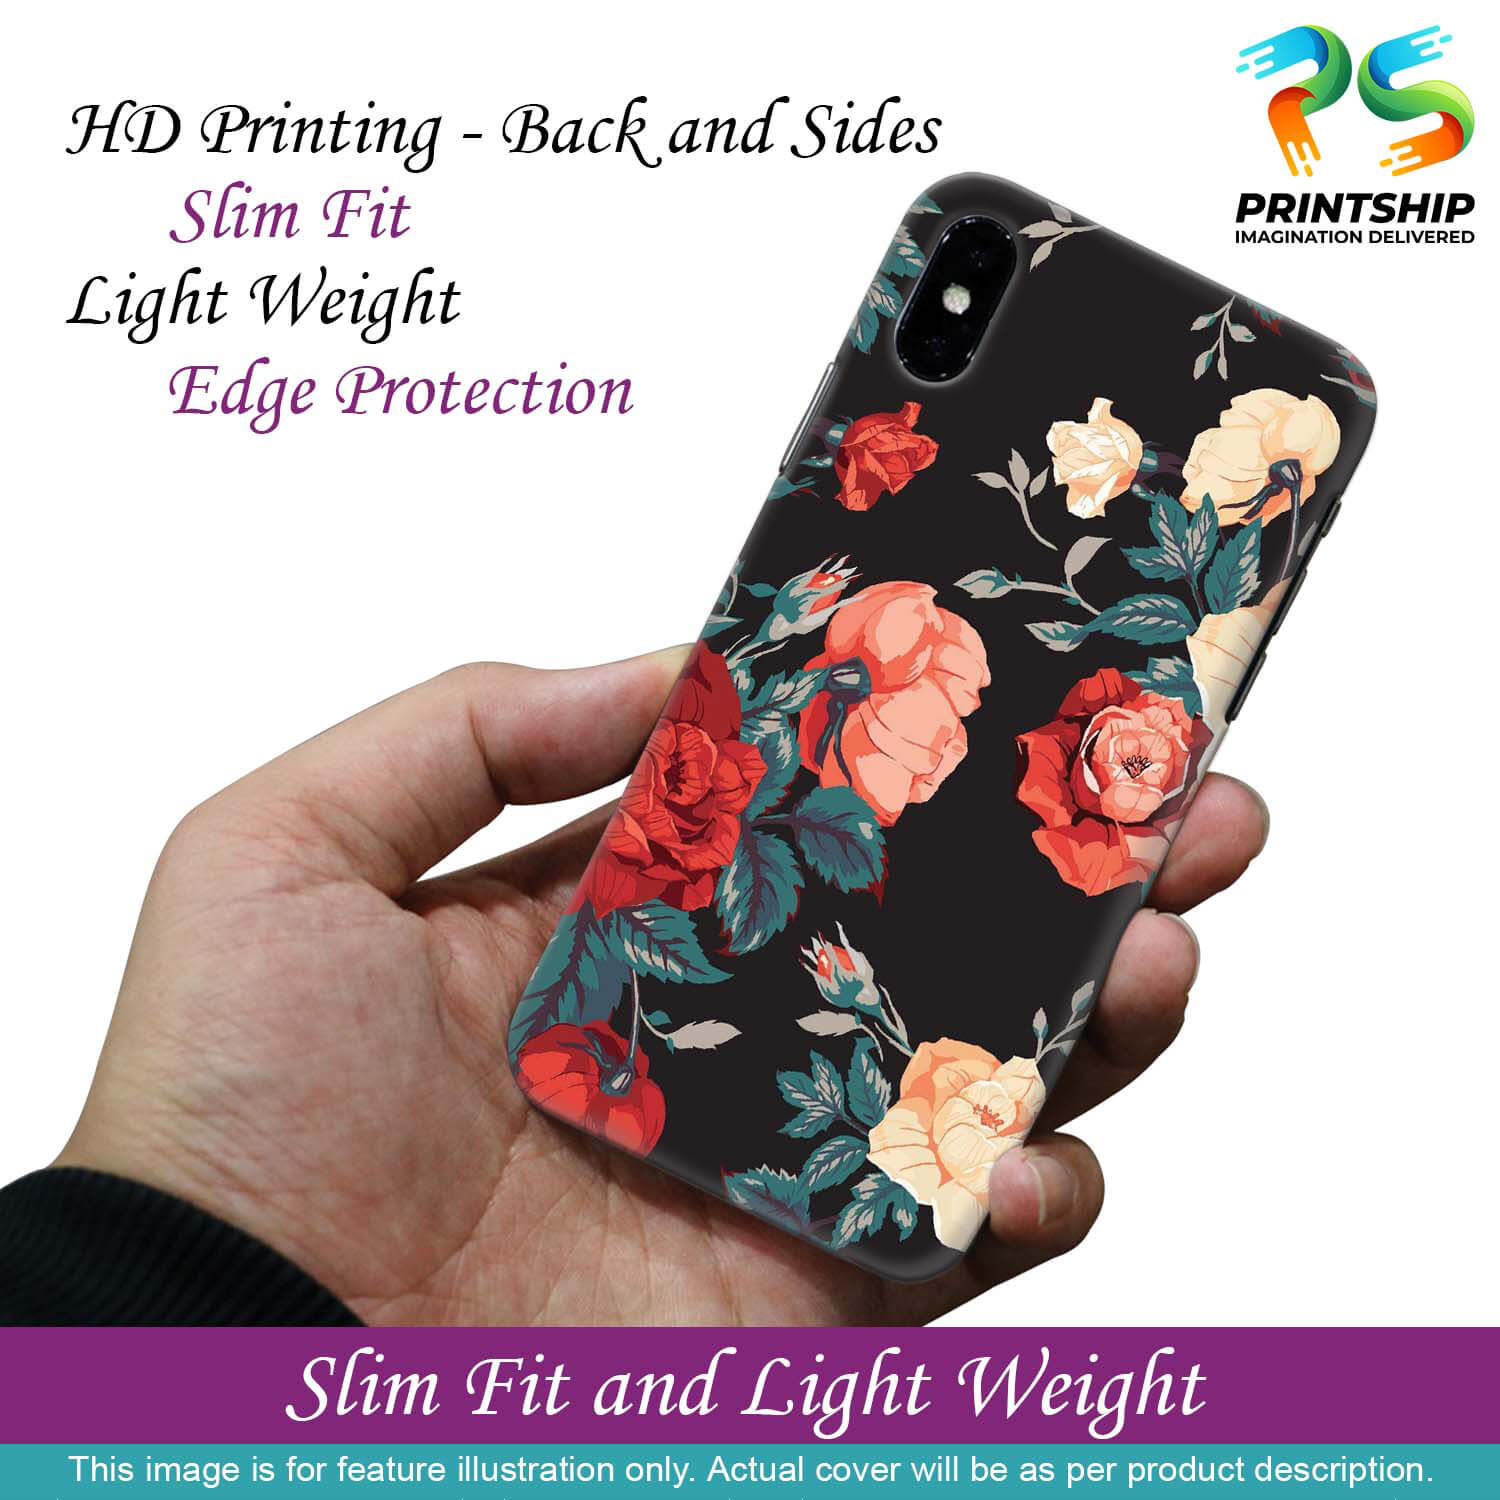 PS1340-Premium Flowers Back Cover for OnePlus Nord